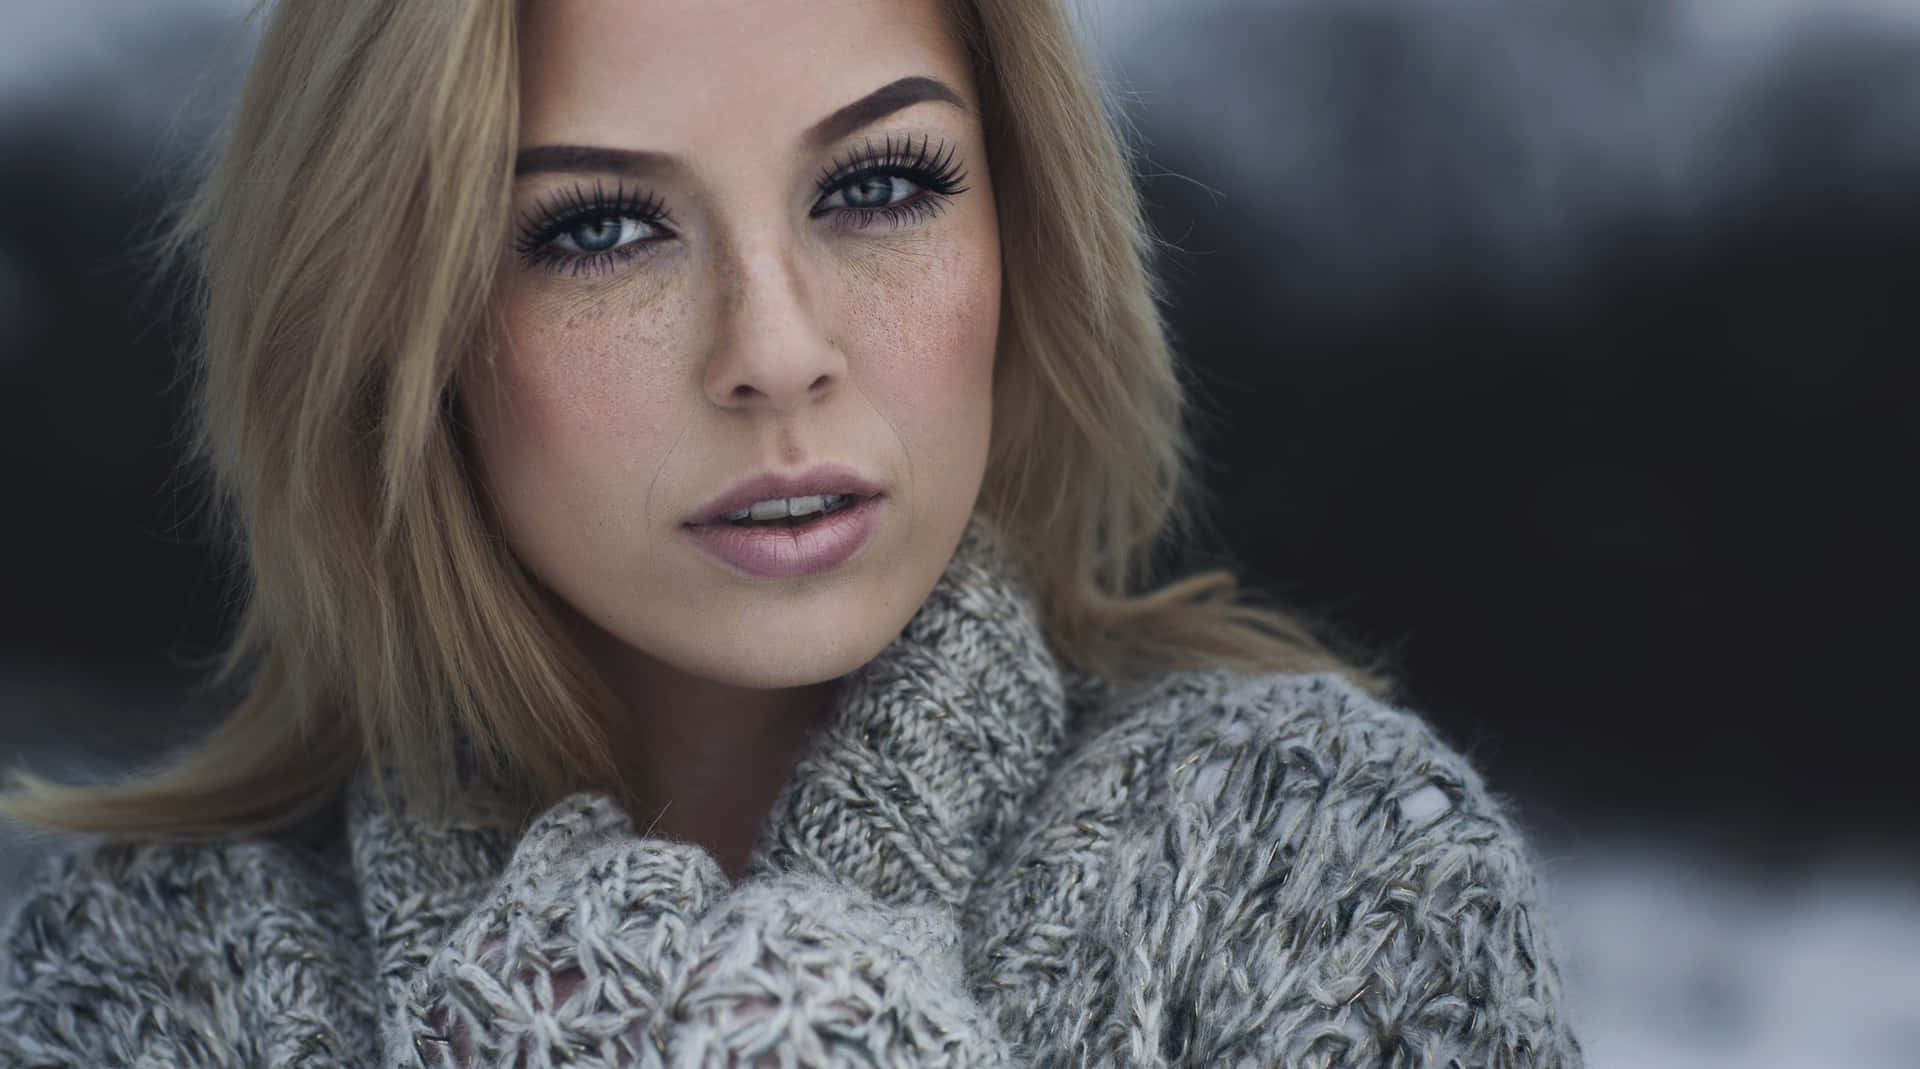 Download A Beautiful Woman In A Sweater Posing In The Snow | Wallpapers.com